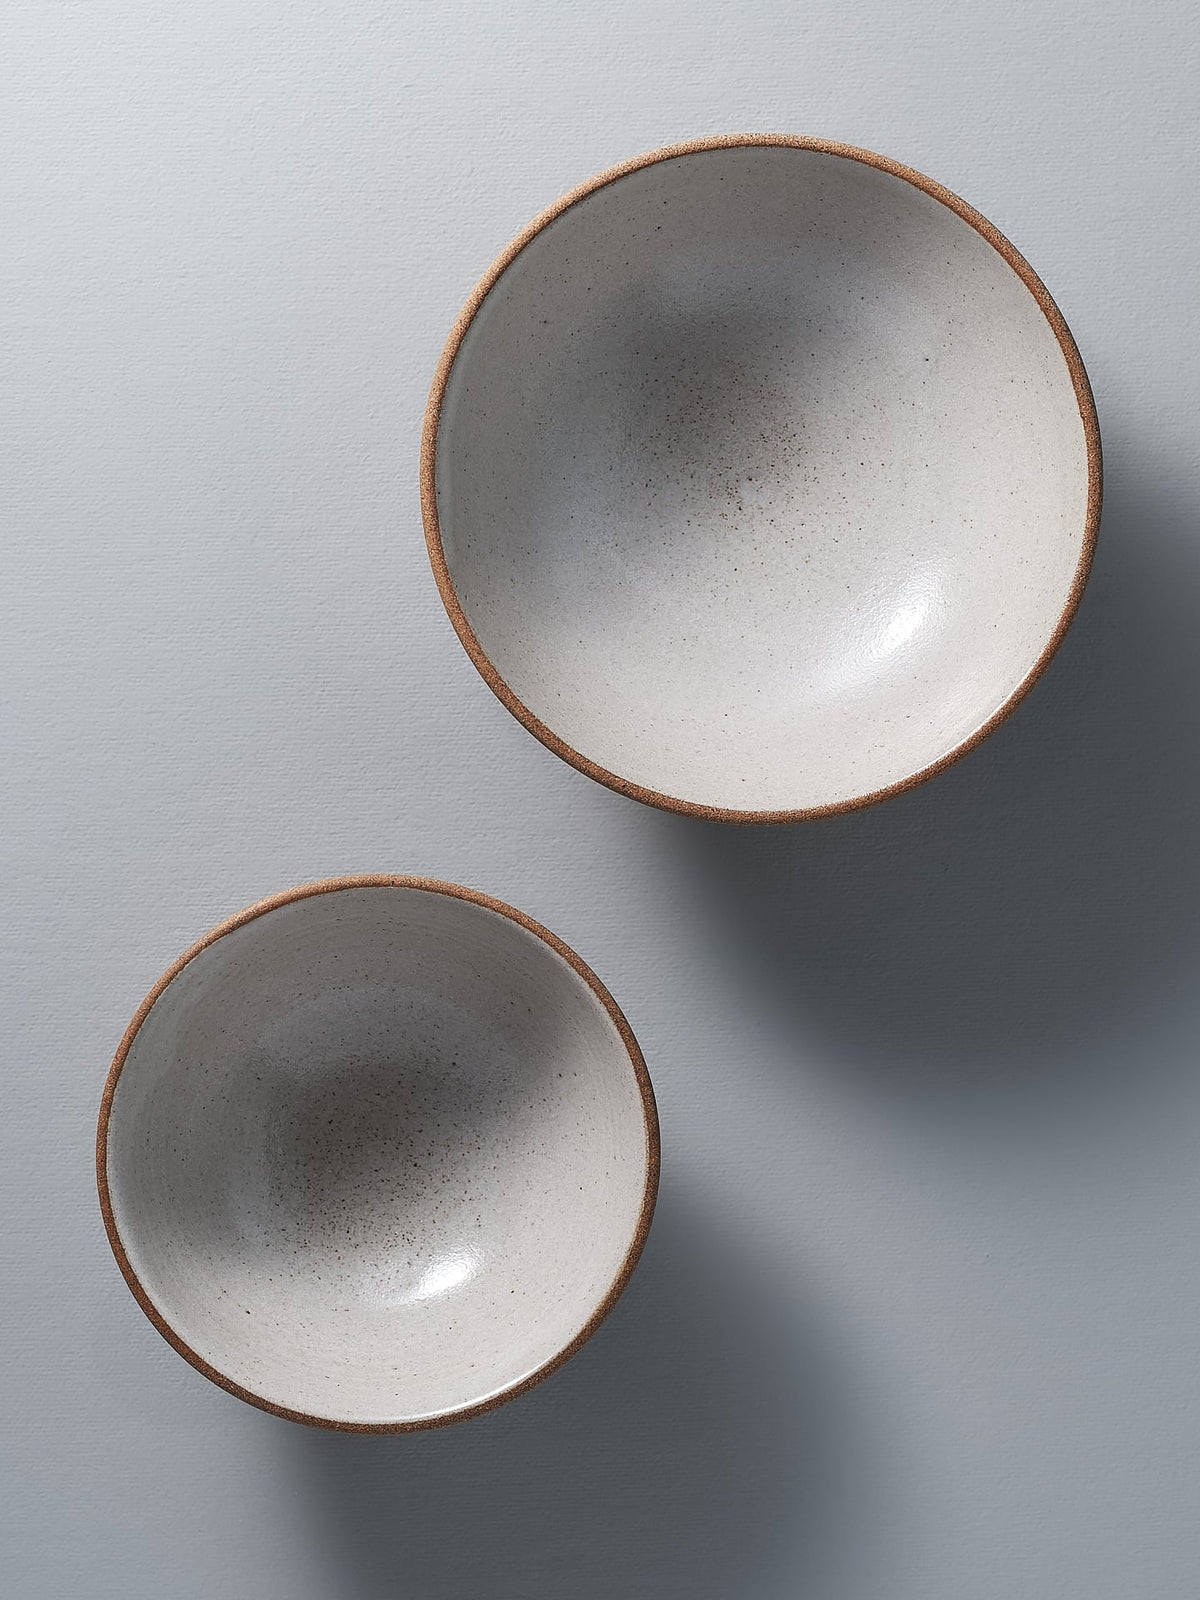 Two Nicola Shuttleworth Condiment Bowl – Large bowls on a gray surface.